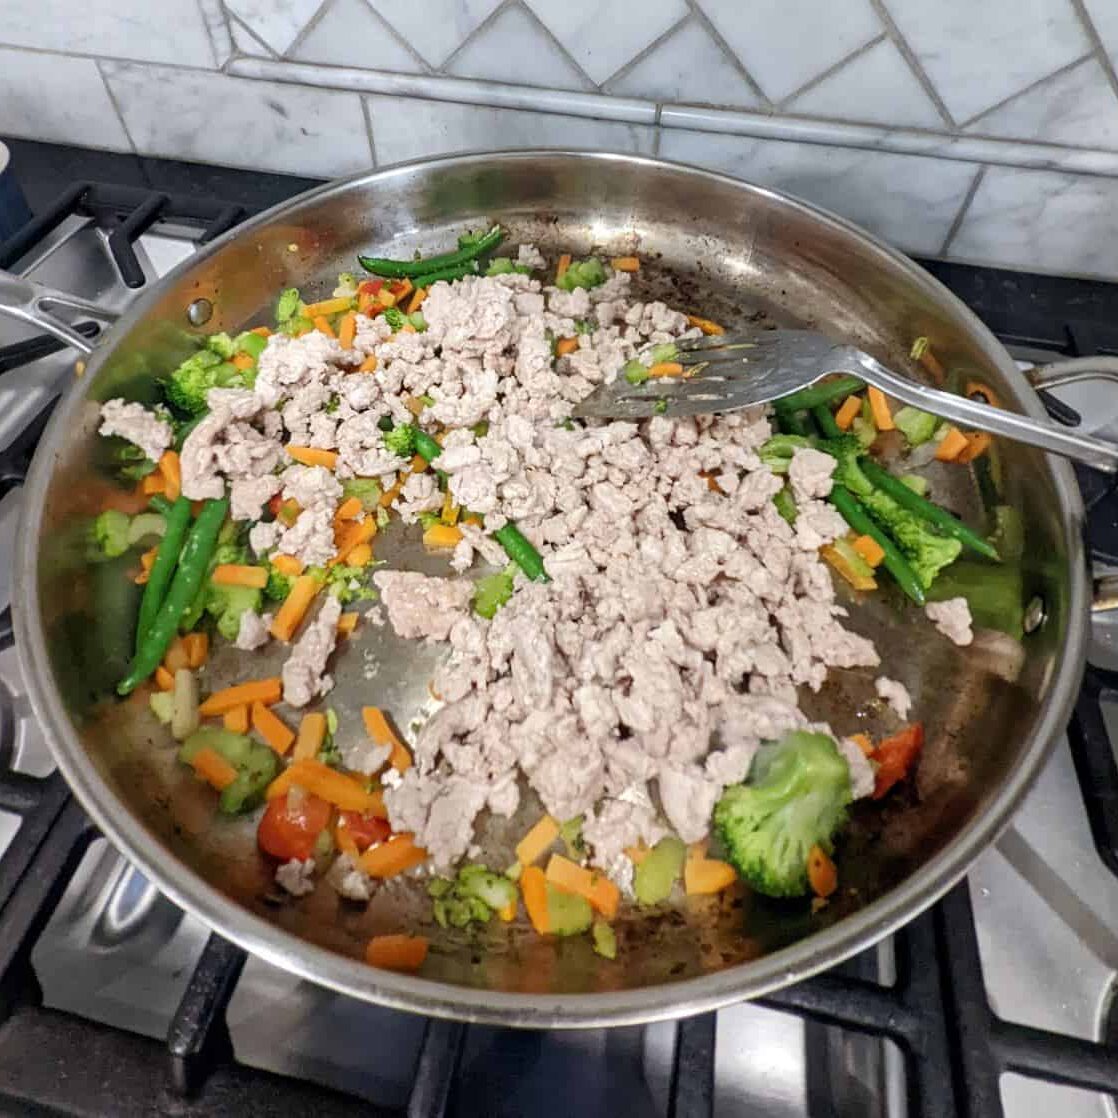 Cooked ground chicken on top of stir fry vegetables in a large metal pan.